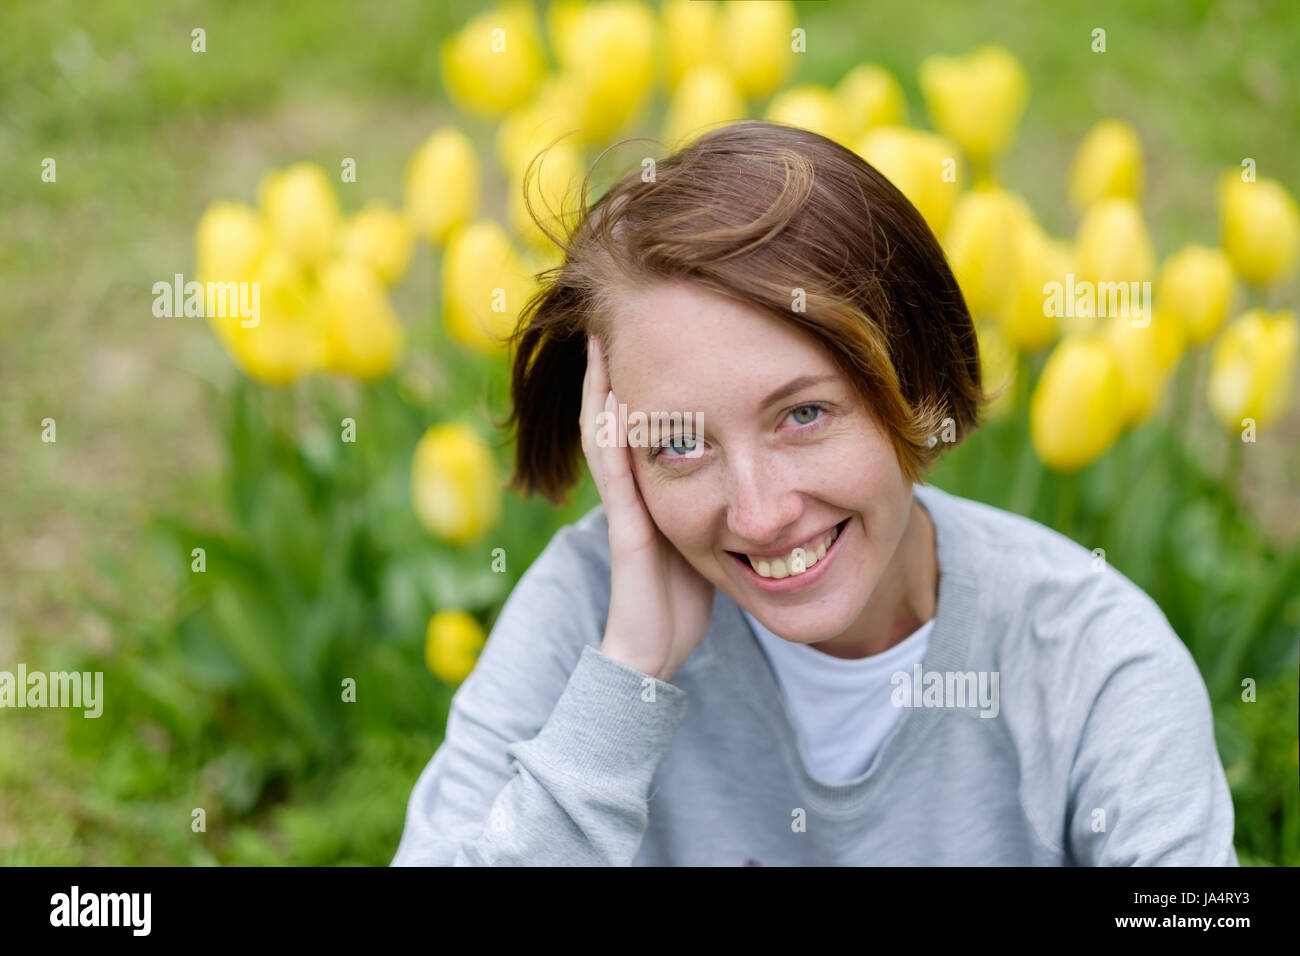 A girl with freckles sits on the grass beside the yellow tulips in the park. Stock Photo